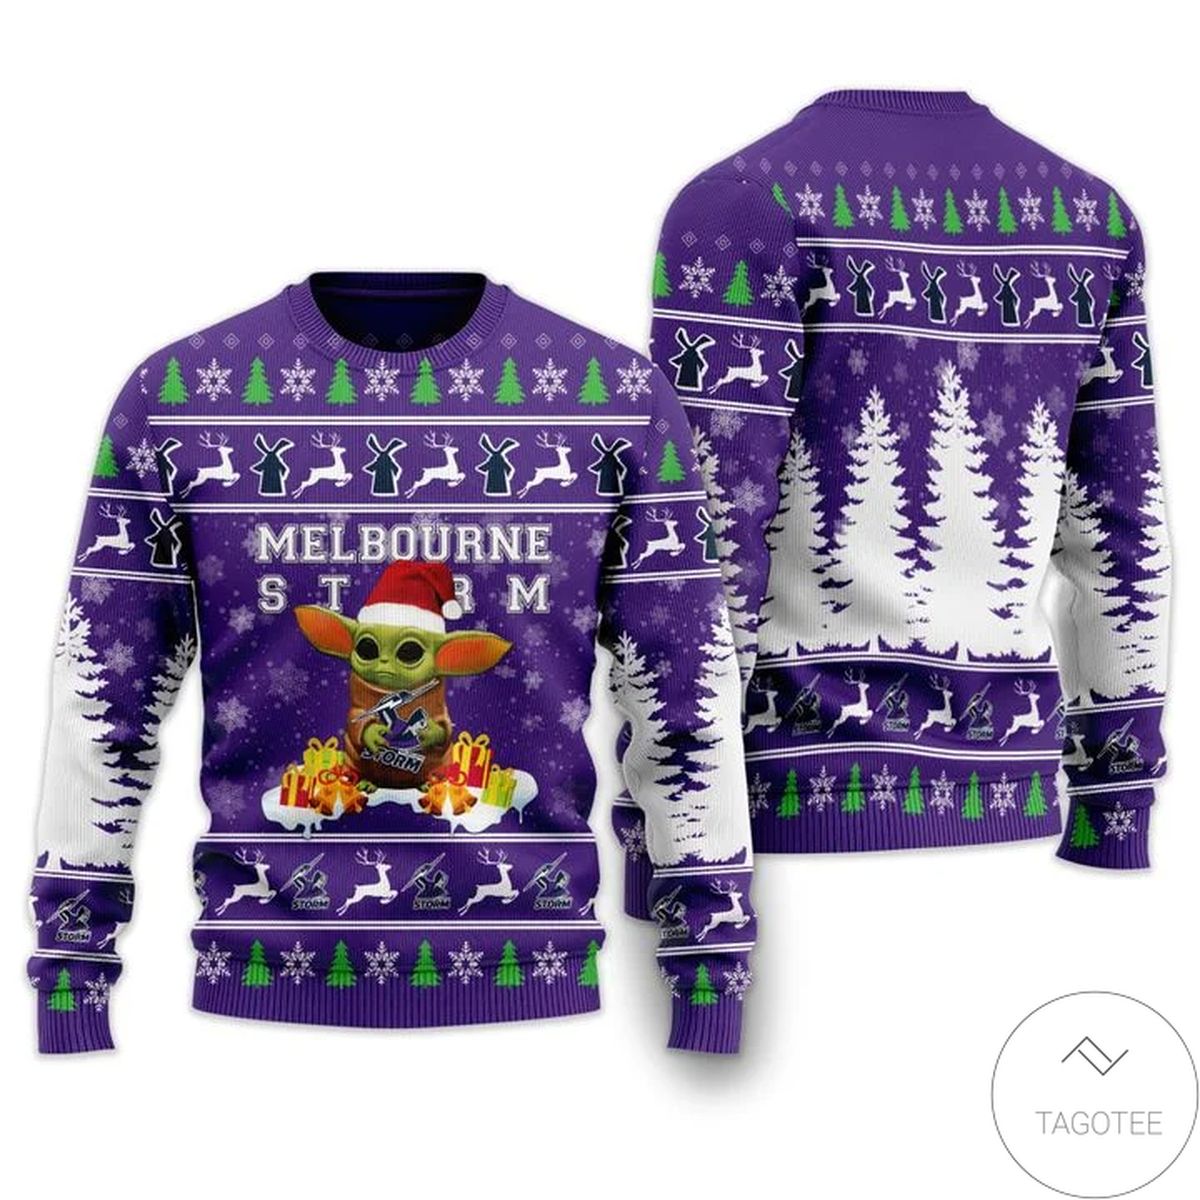 Melbourne Storm Baby Yoda Ugly Christmas Sweater